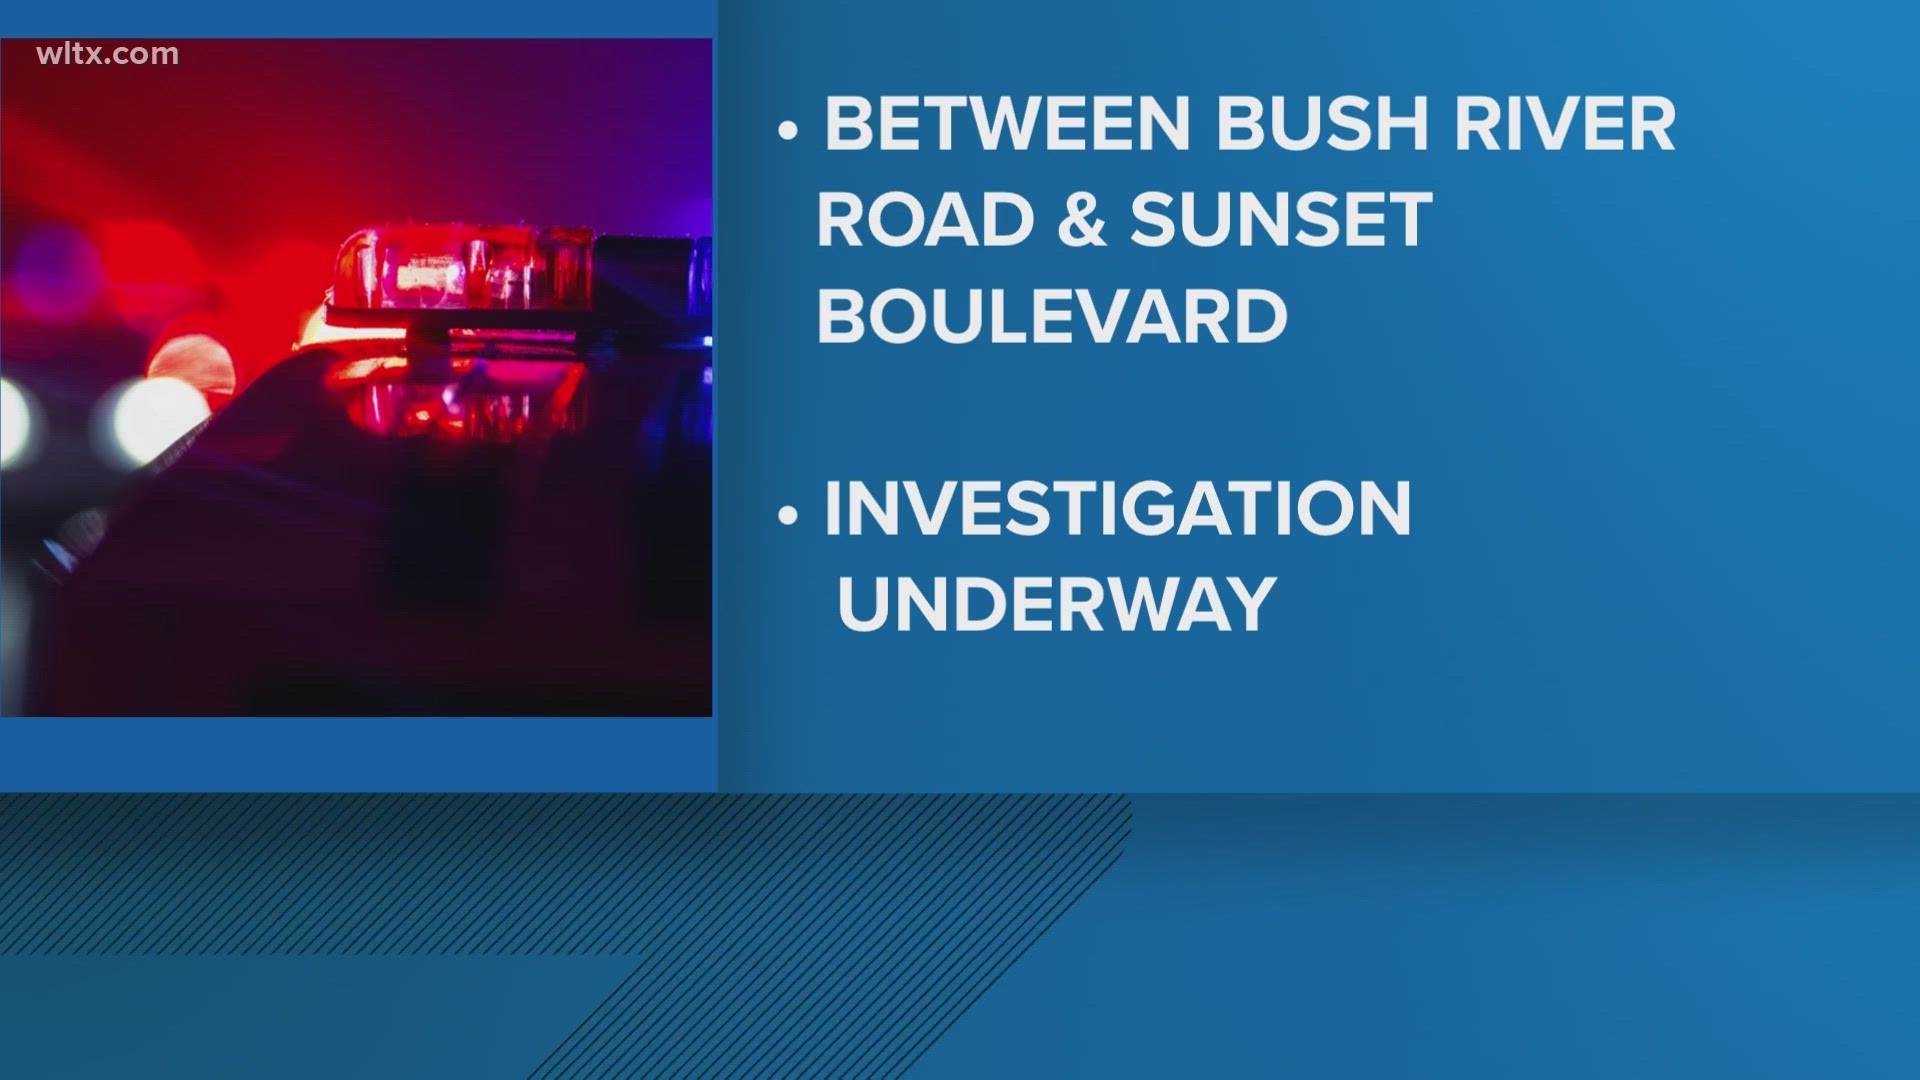 Lexington Deputies say a body was found between Bush River road and Sunset Blvd on I-20.